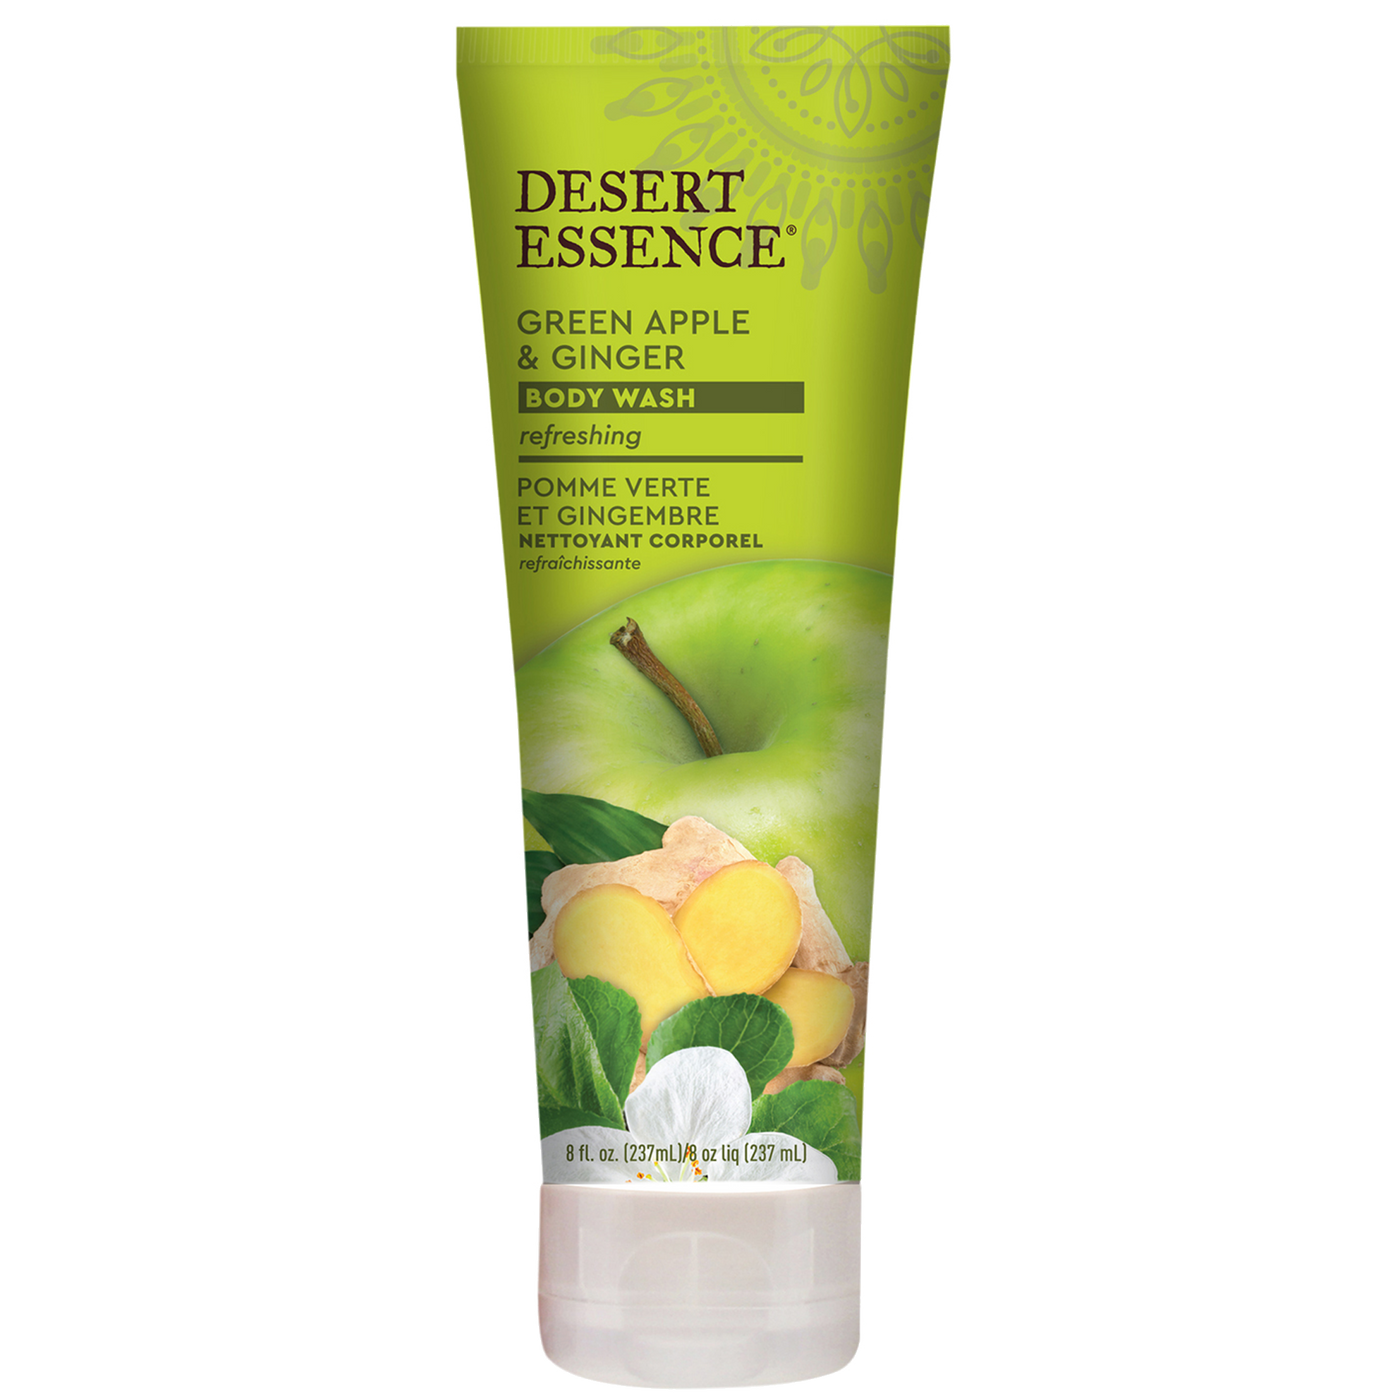 Green Apple & Ginger Body Wash 8 fl oz Curated Wellness